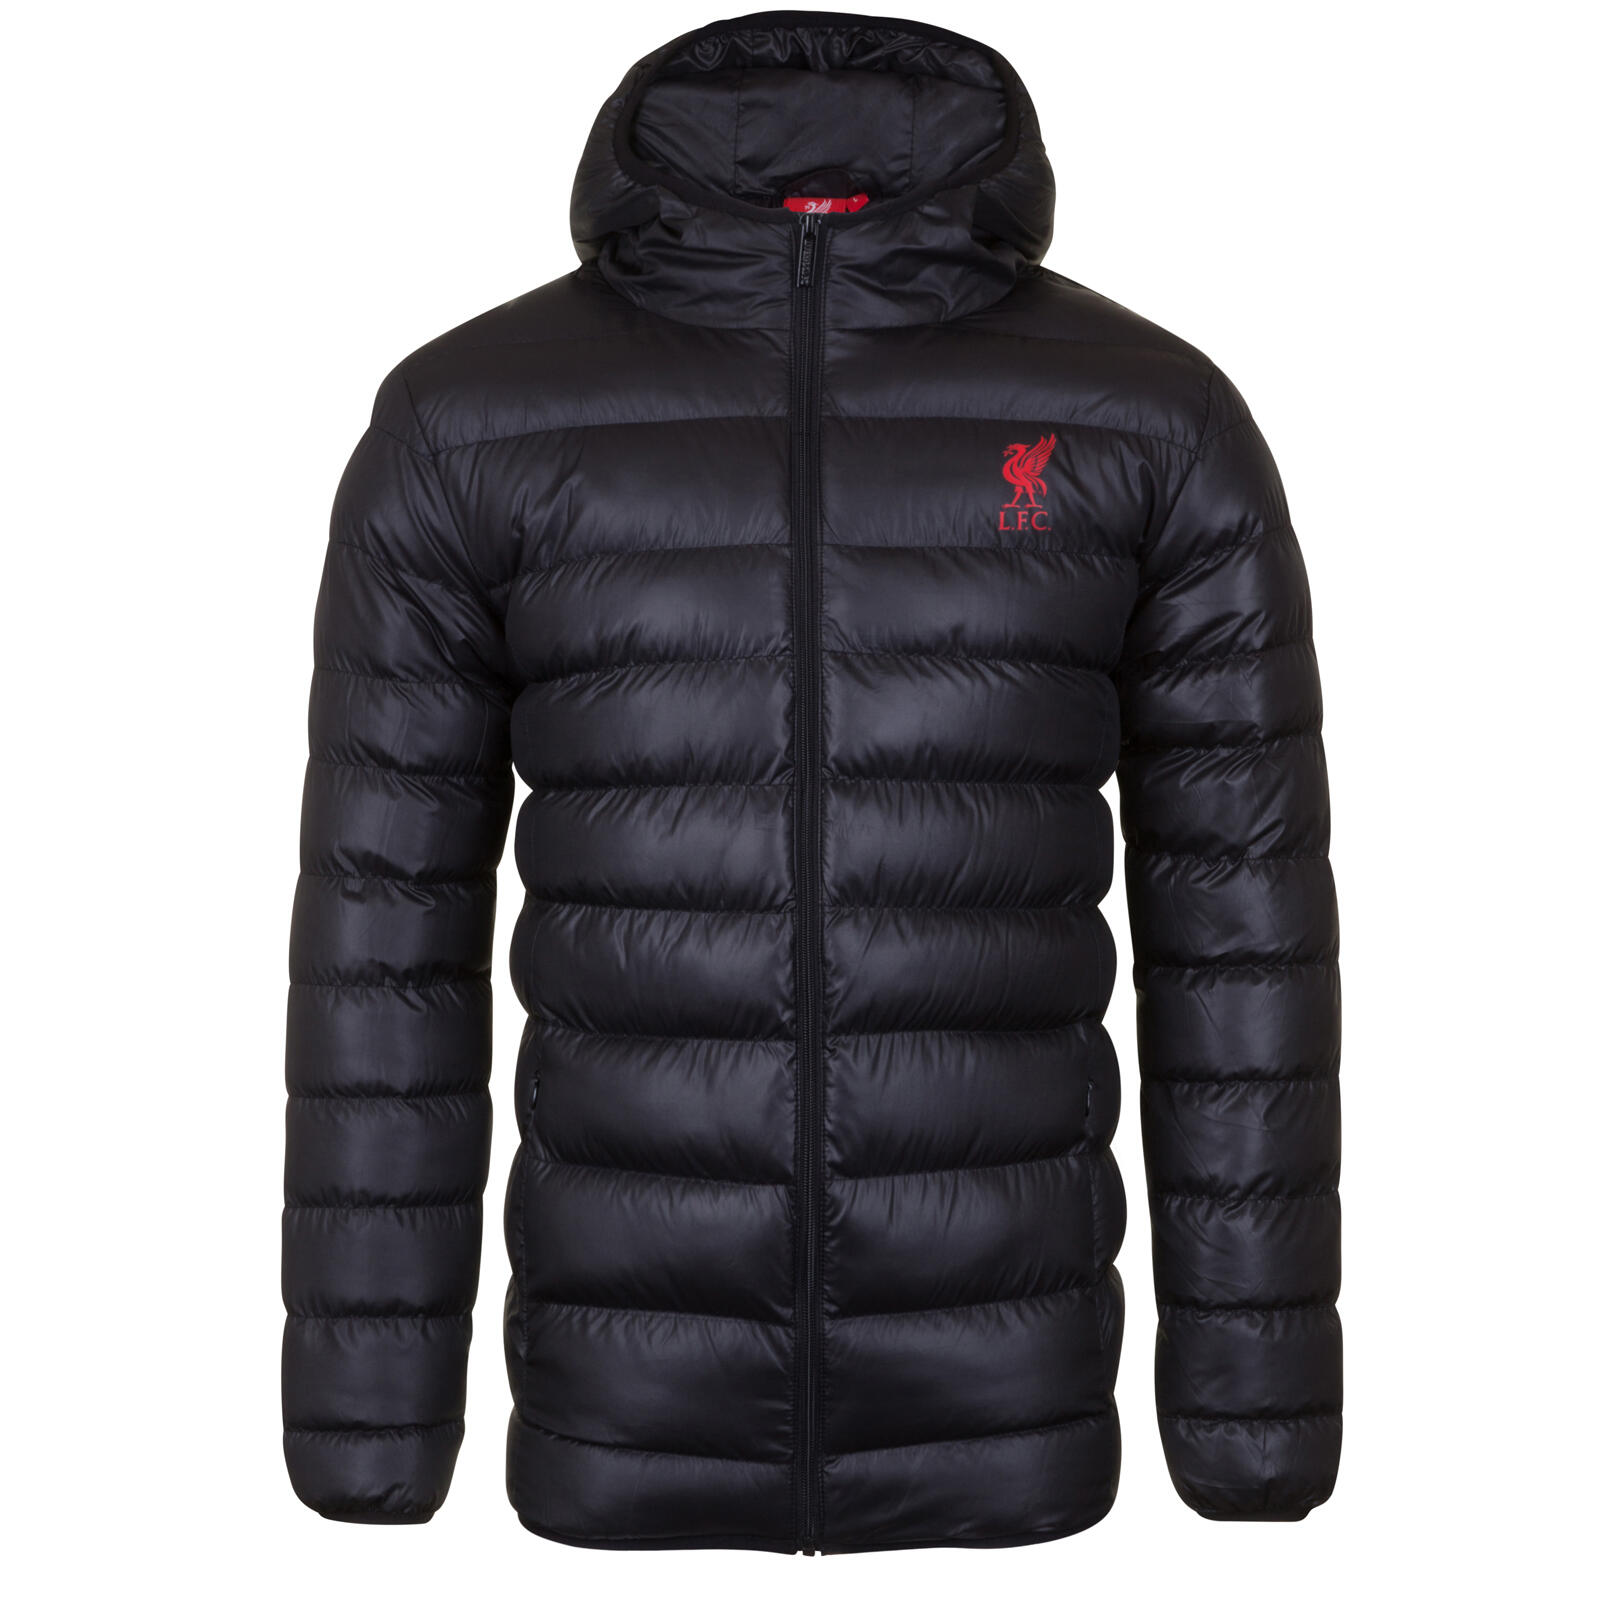 LIVERPOOL FC Liverpool FC Mens Jacket Hooded Winter Quilted OFFICIAL Football Gift